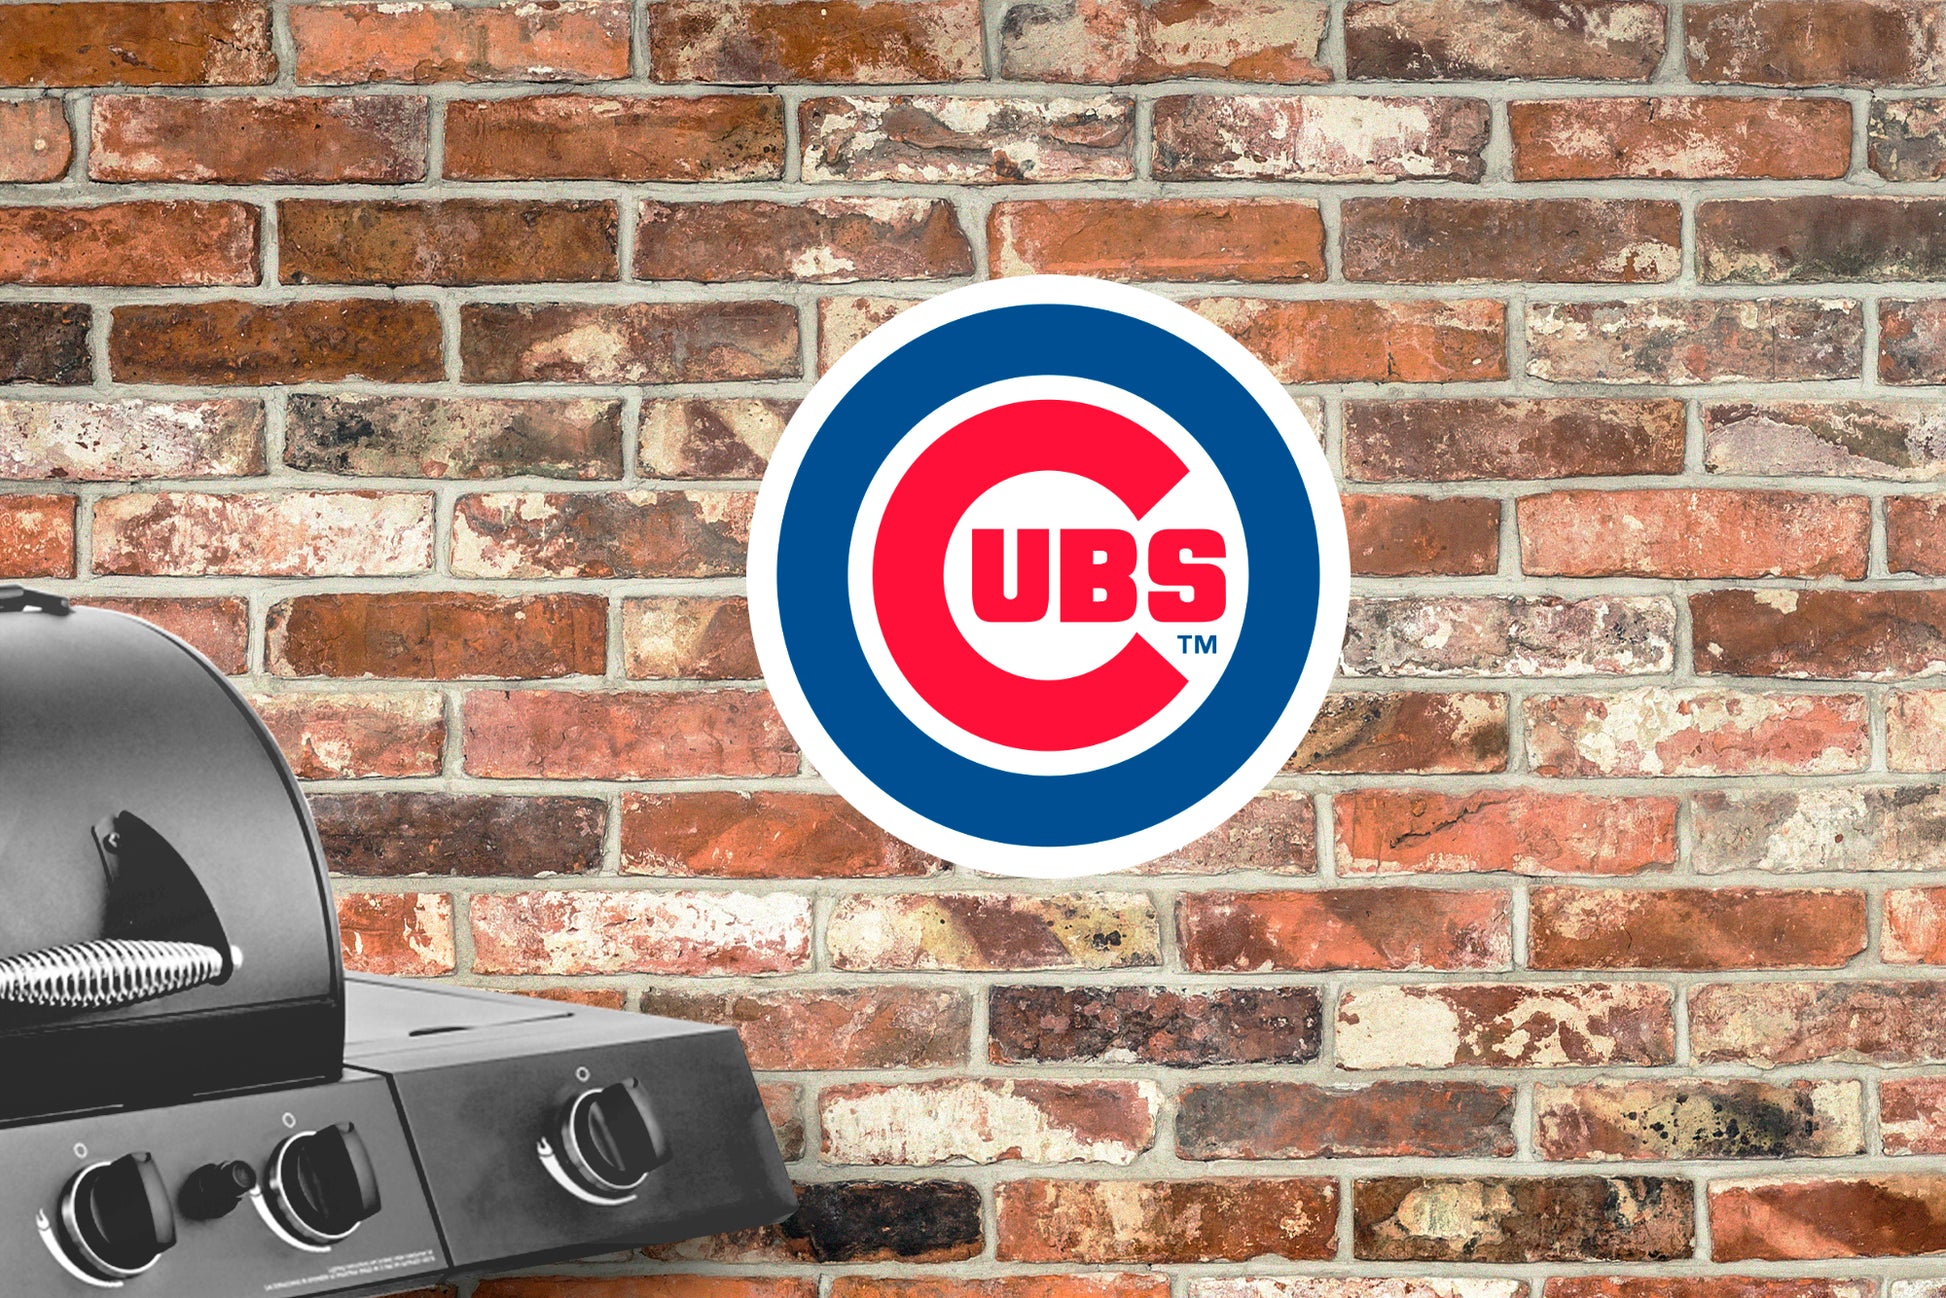 Chicago Cubs: Logo - MLB Outdoor Graphic 9W x 12H